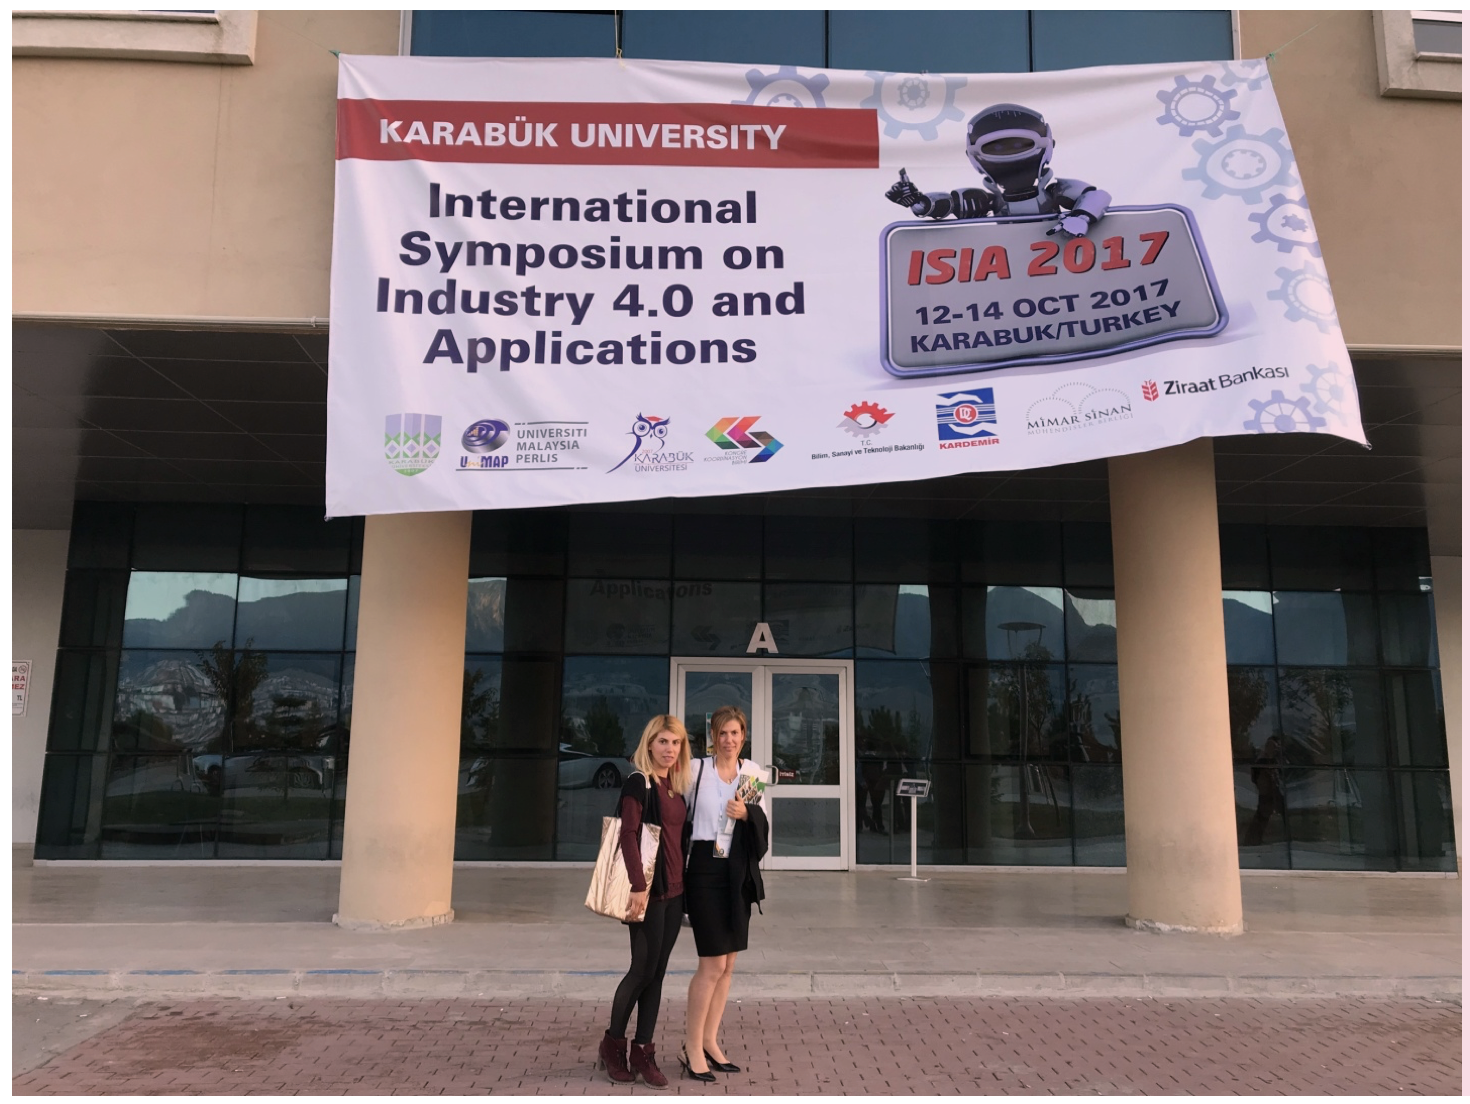 The work of Academic Members of Near East University Faculty of Engineering received a lot of attention at the International Symposium on Industry 4.0 and Applications (ISIA 2017)